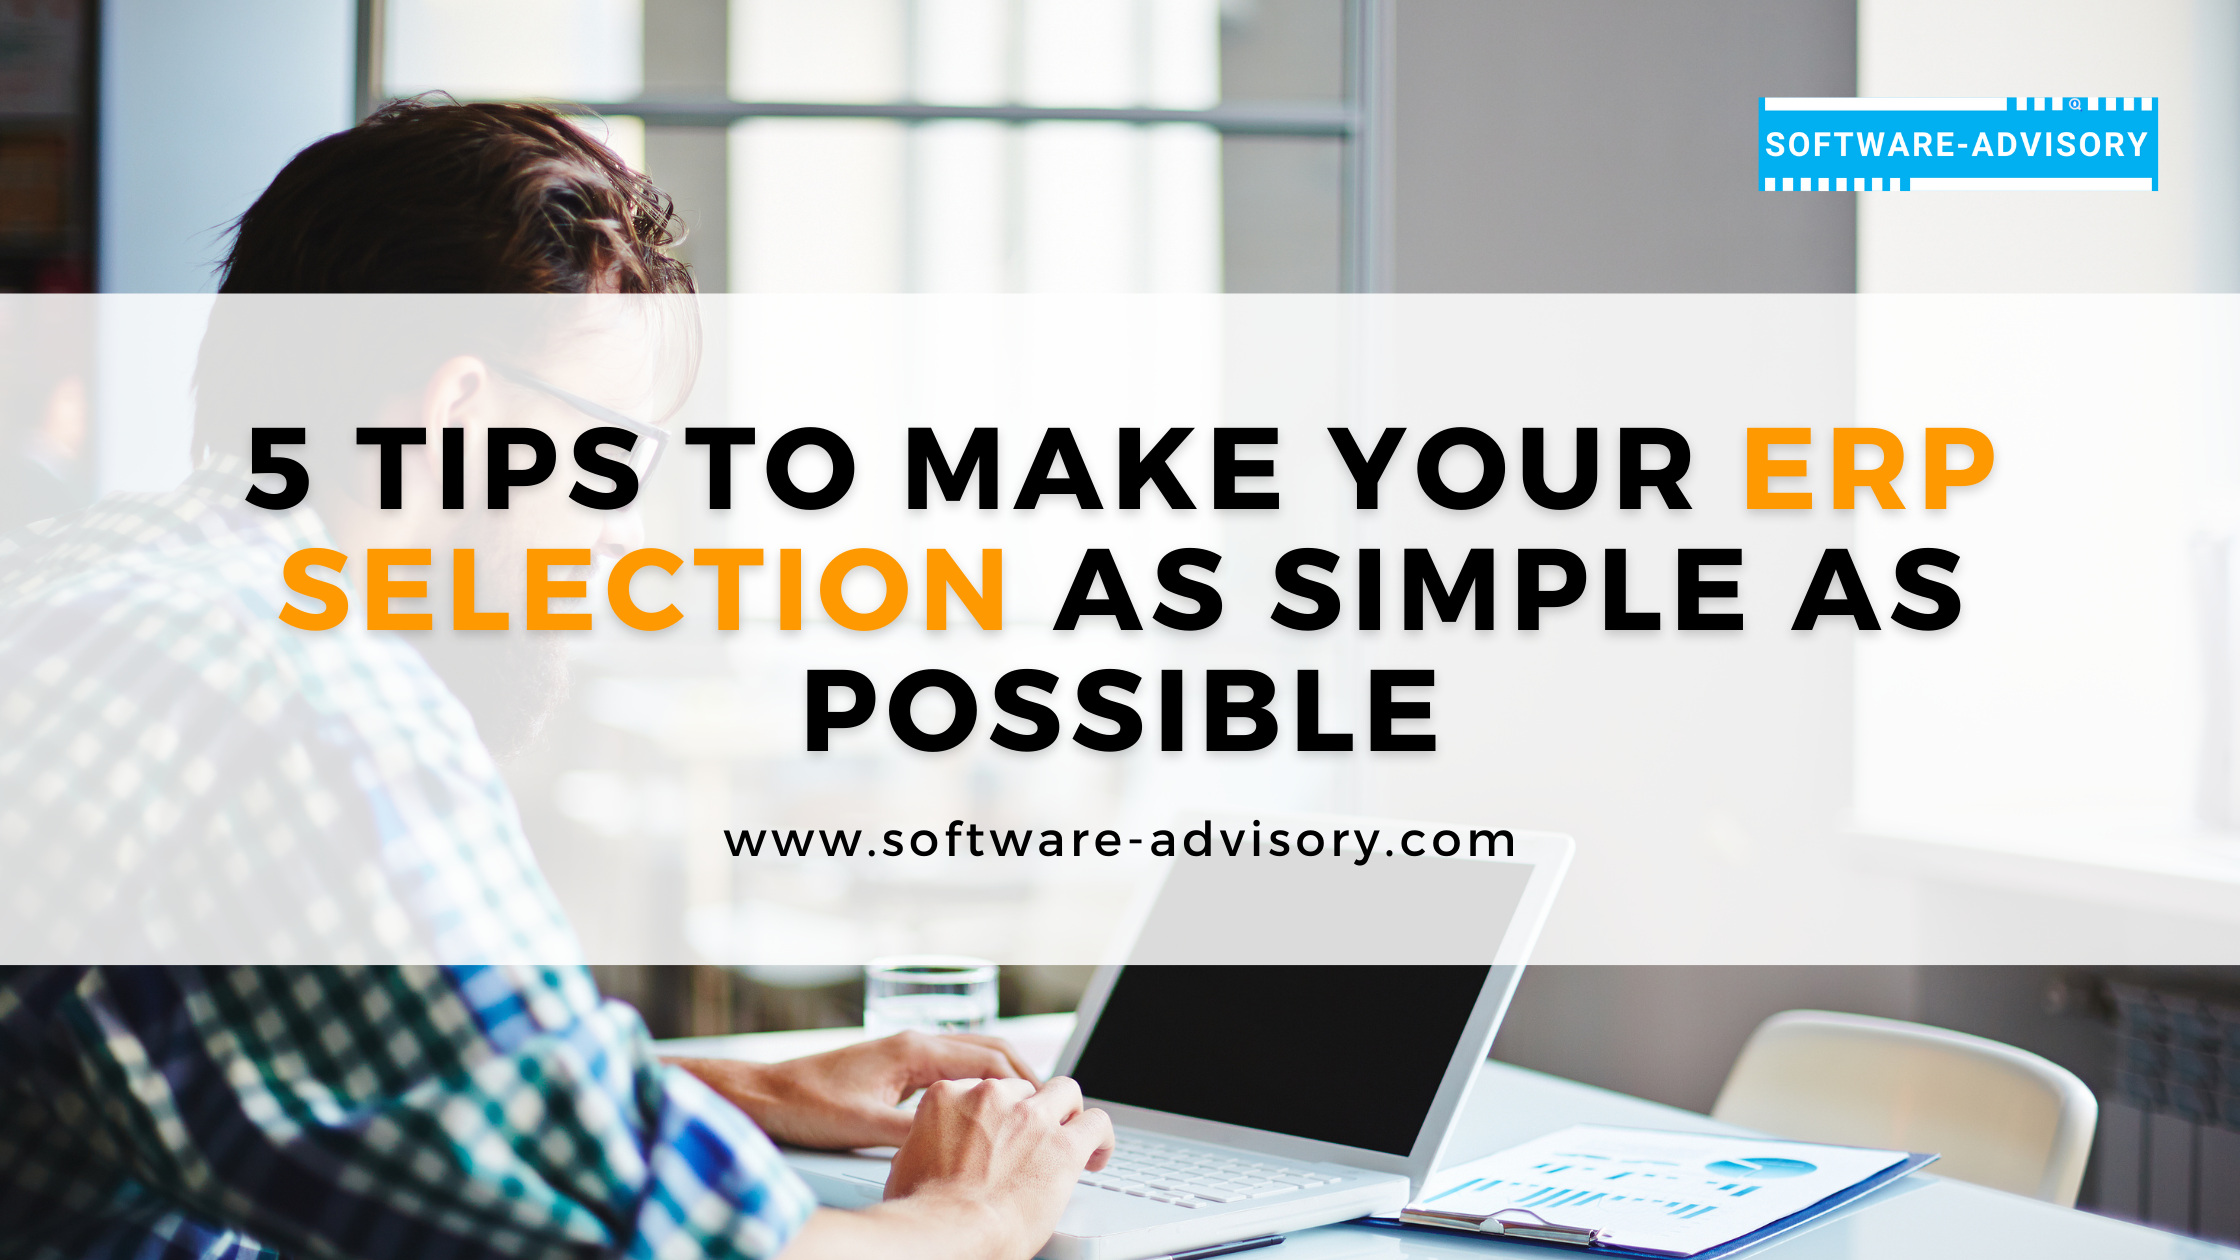 5 Tips to Make Your ERP Selection as Simple as Possible